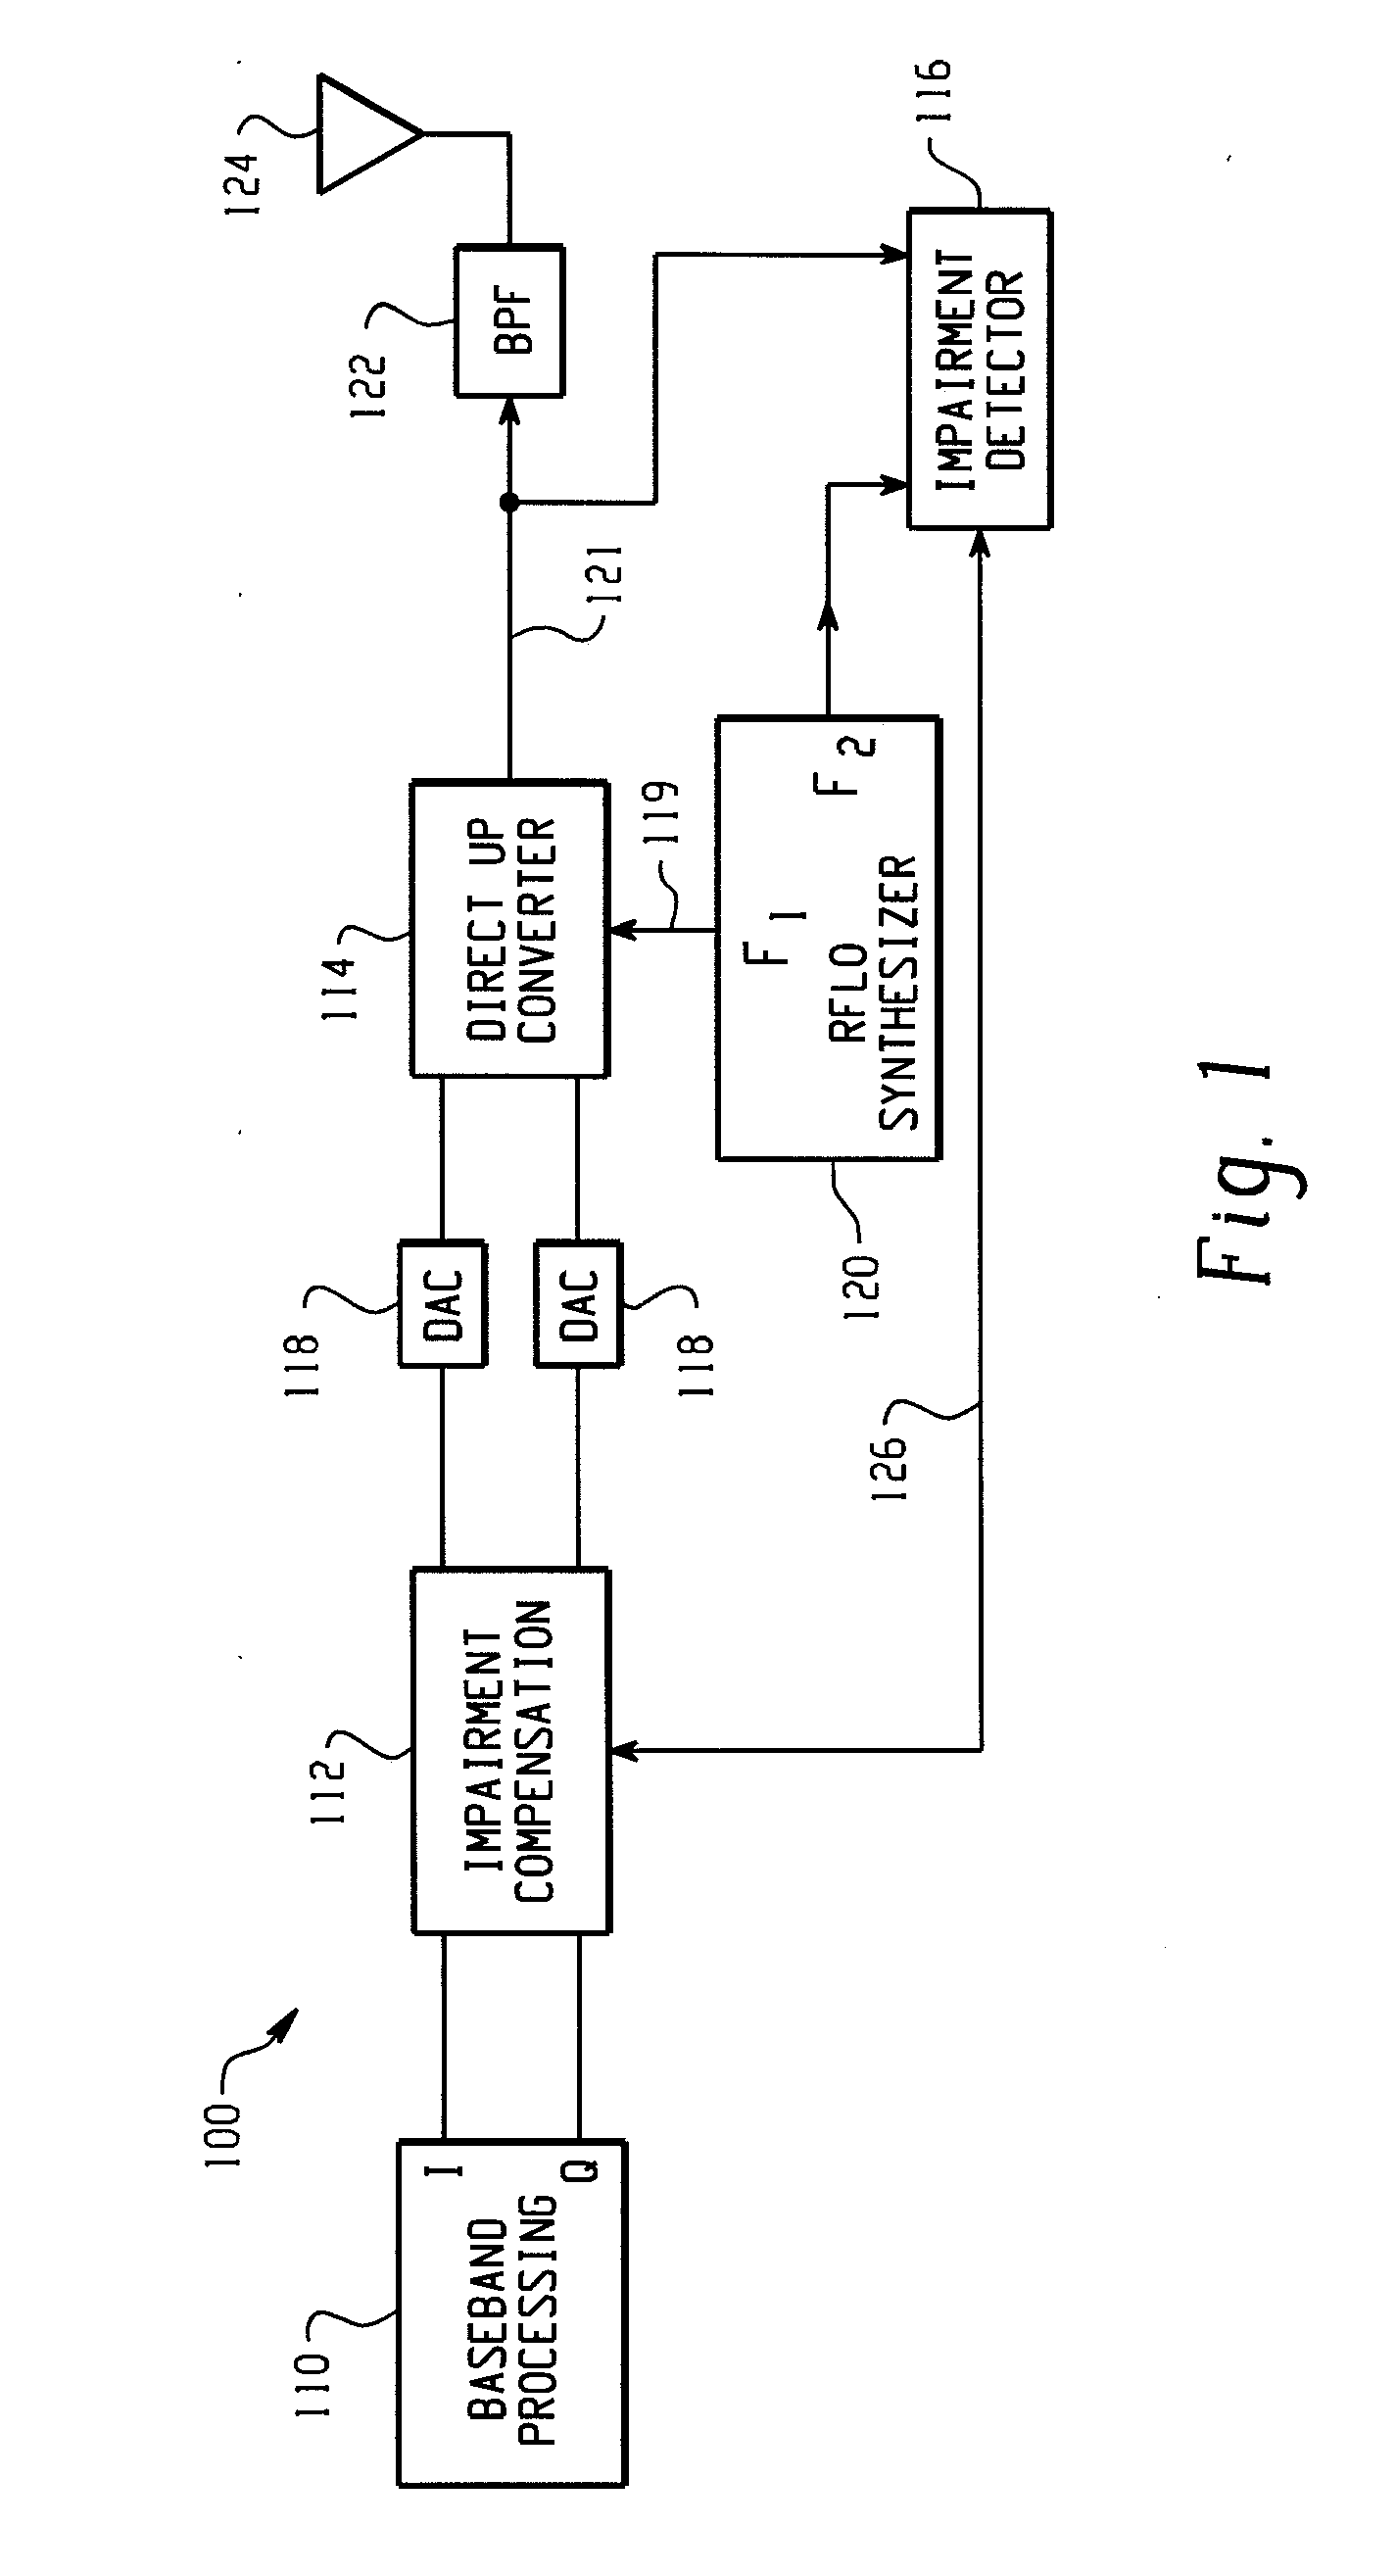 Feedback Compensation Detector For A Direct Conversion Transmitter